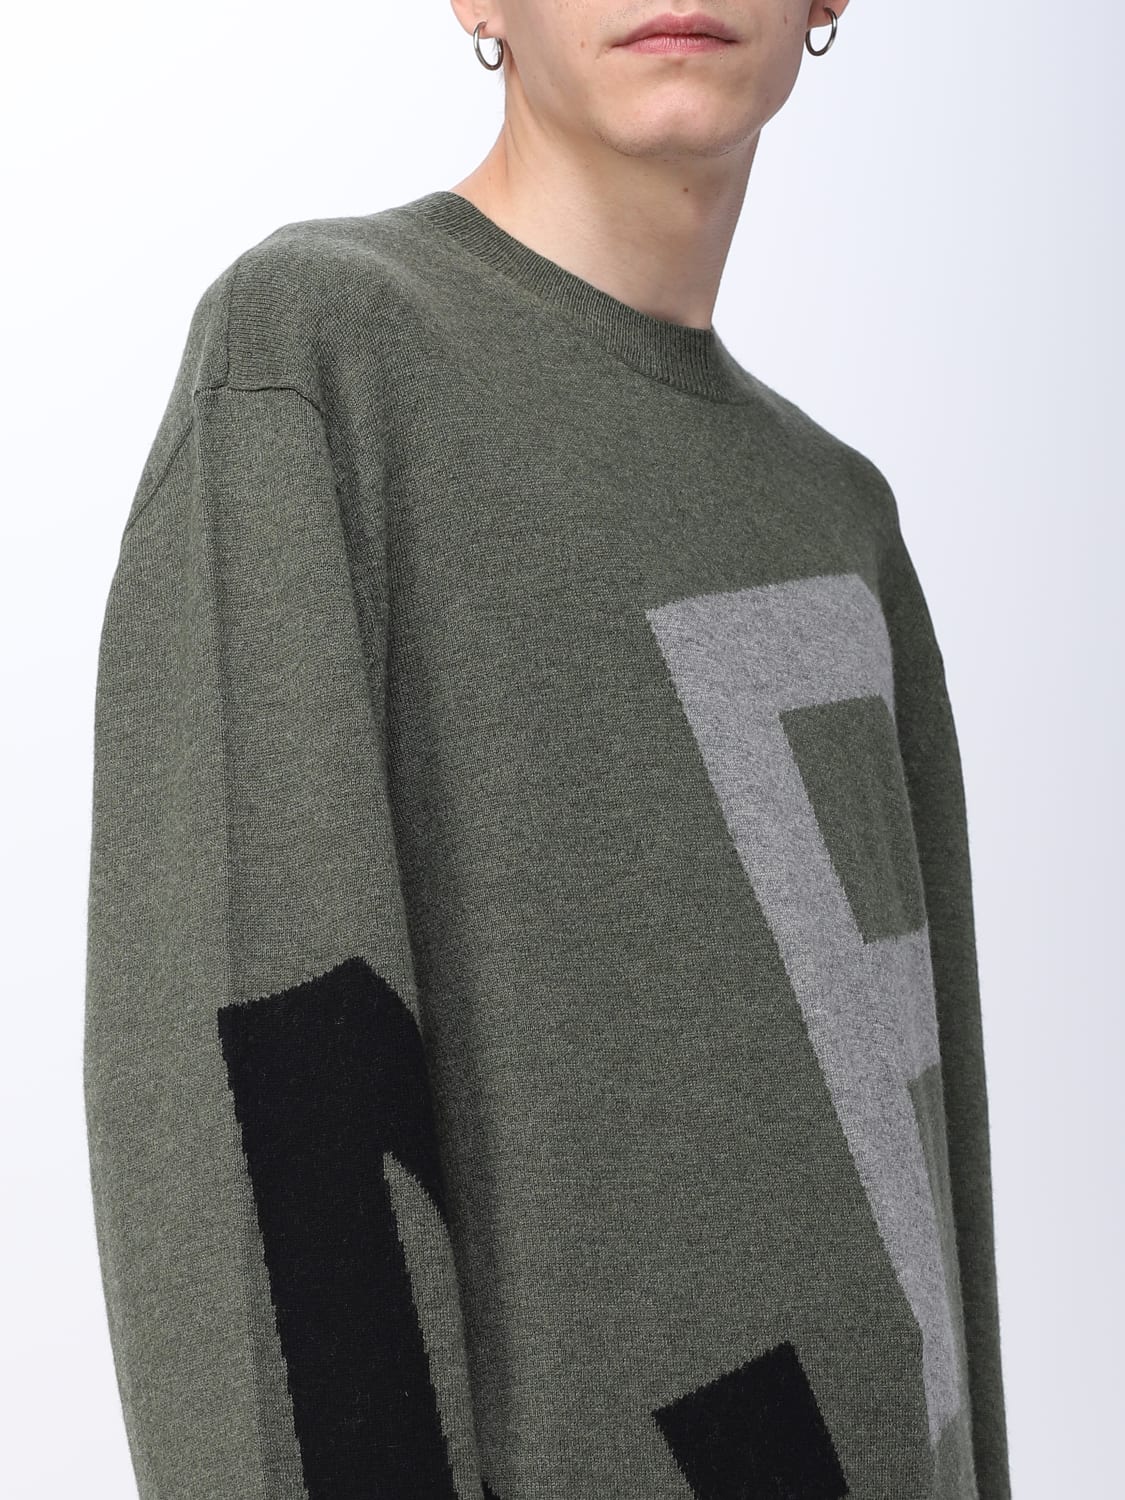 A.P.C.: sweater for man - Kaki | A.p.c. sweater WVBBXH23222 online on ...